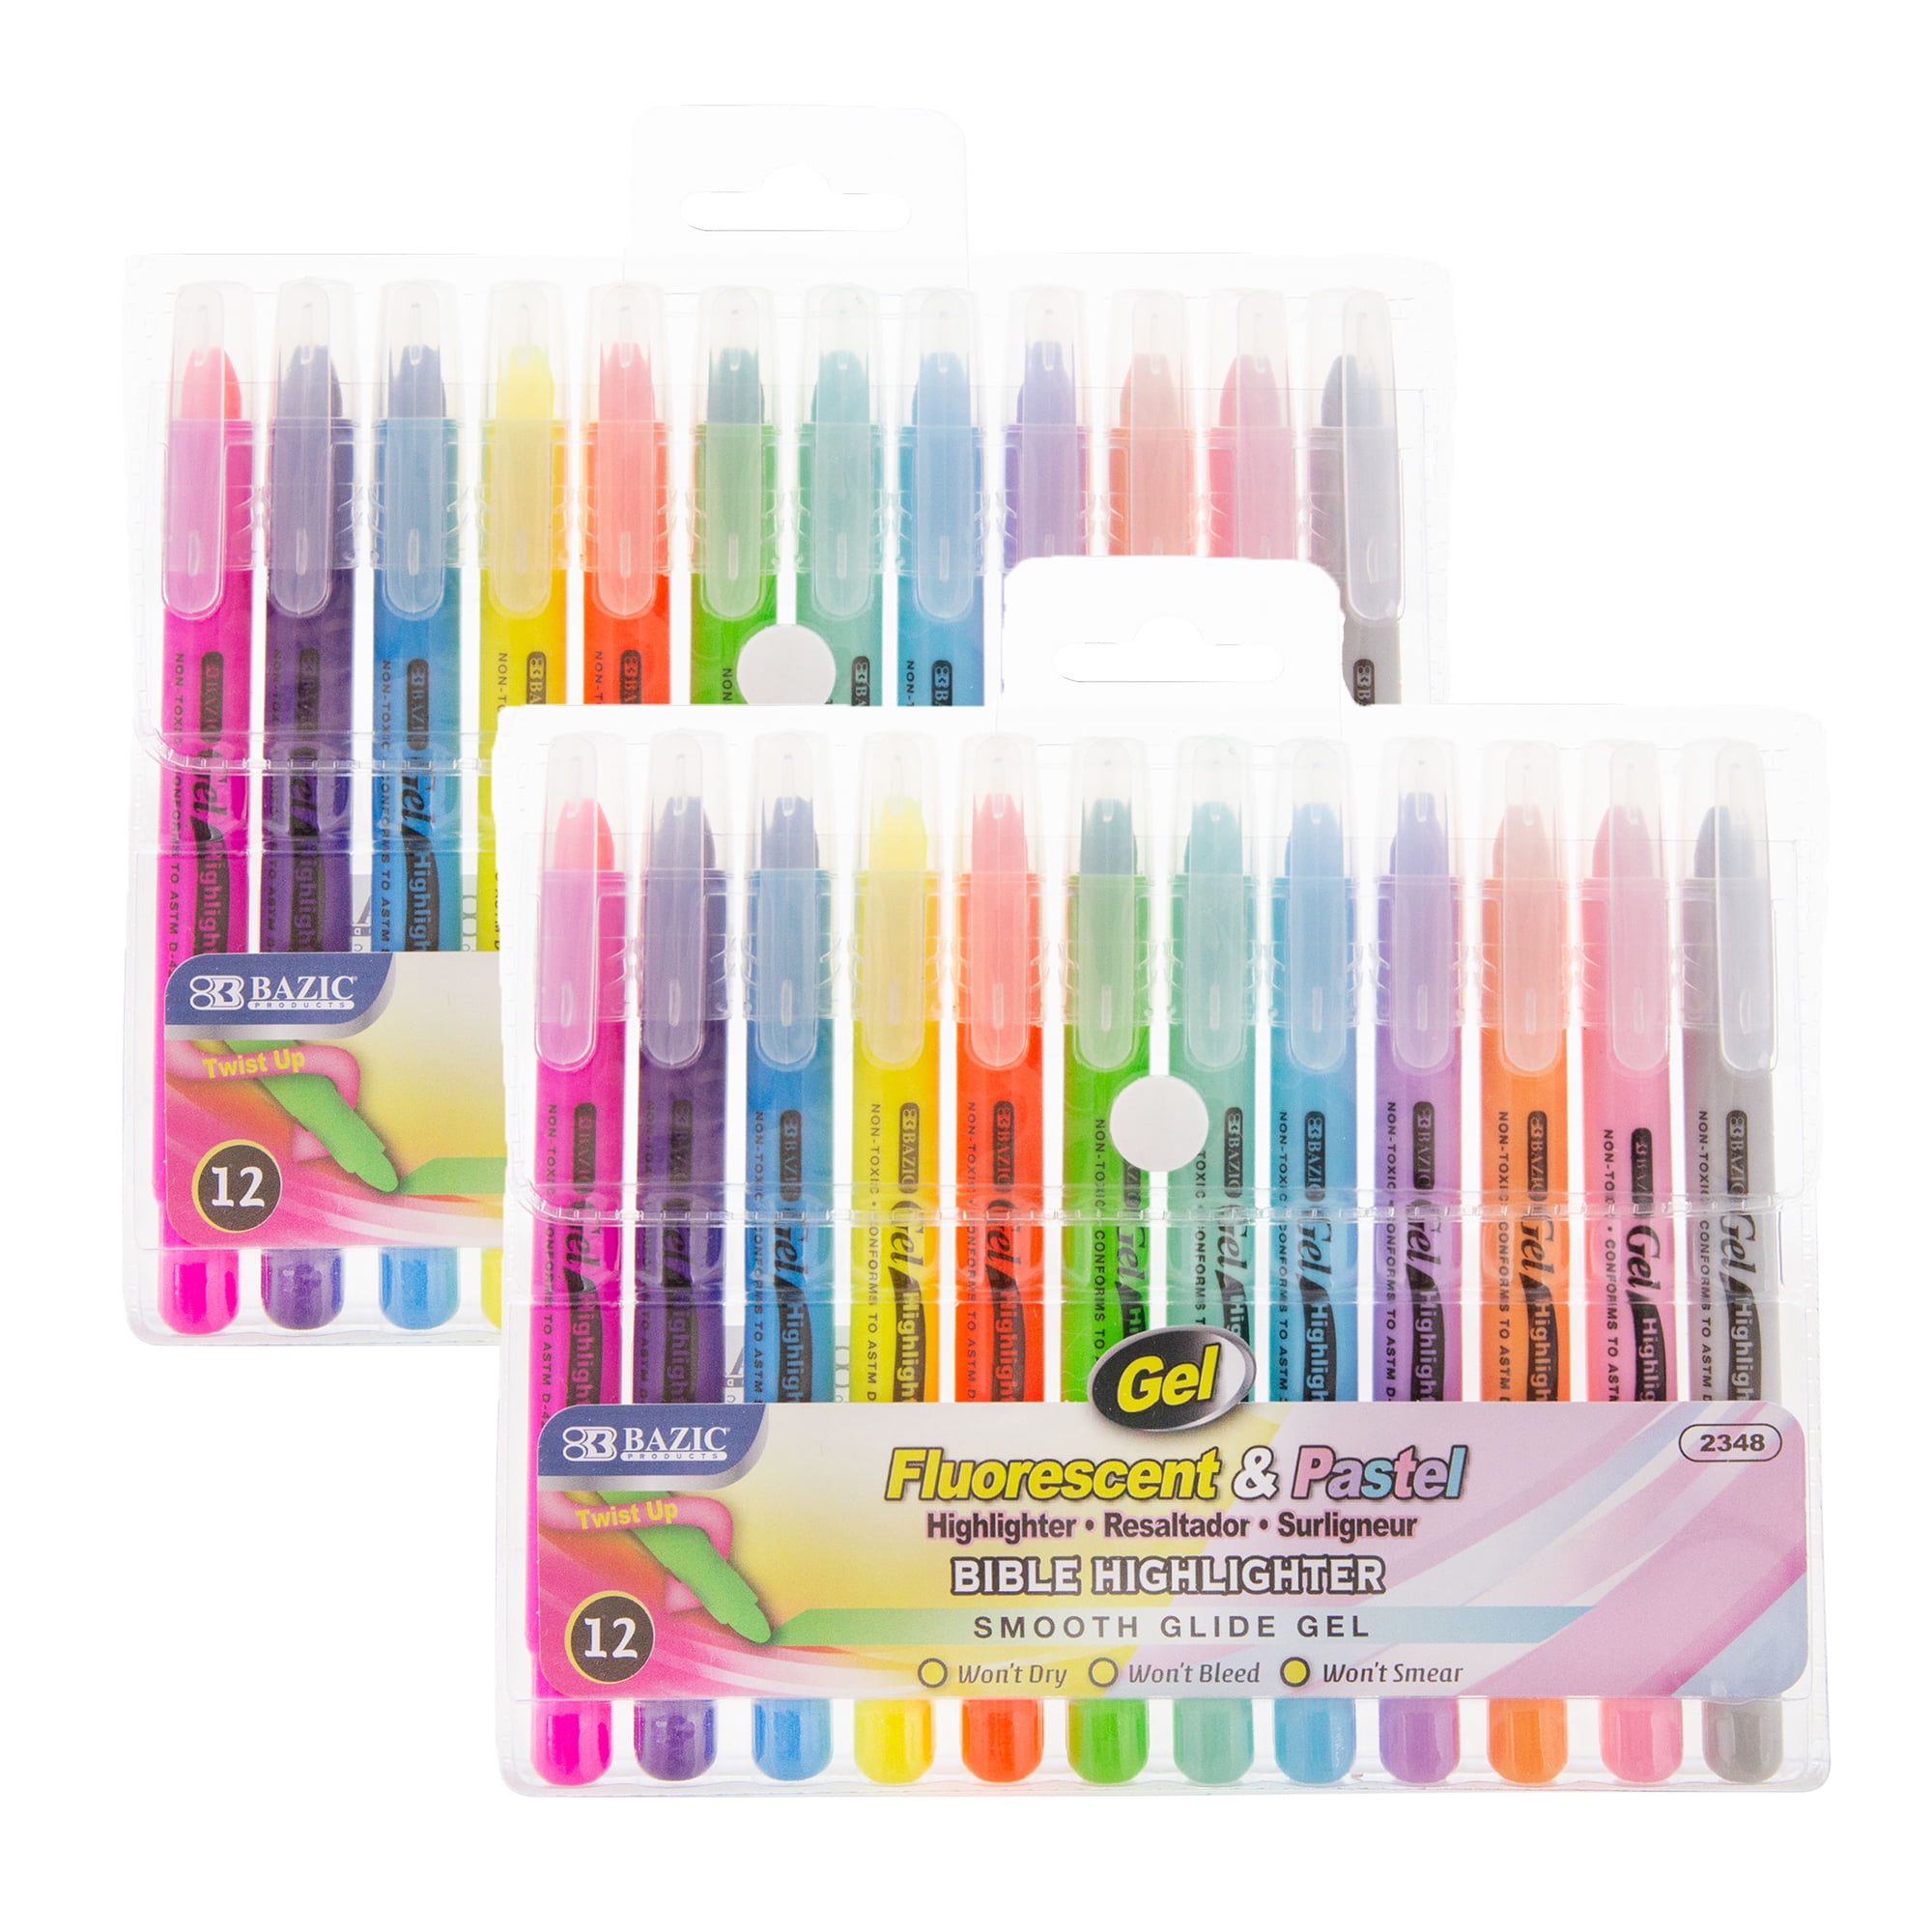 Zebra Pen Journaling and Lettering Set, Includes 6 Highlighters, 6 Brush  Pens, and 6 Sarasa Clip Retractable Gel Pens, Pastel Ink Colors, 18-Pack